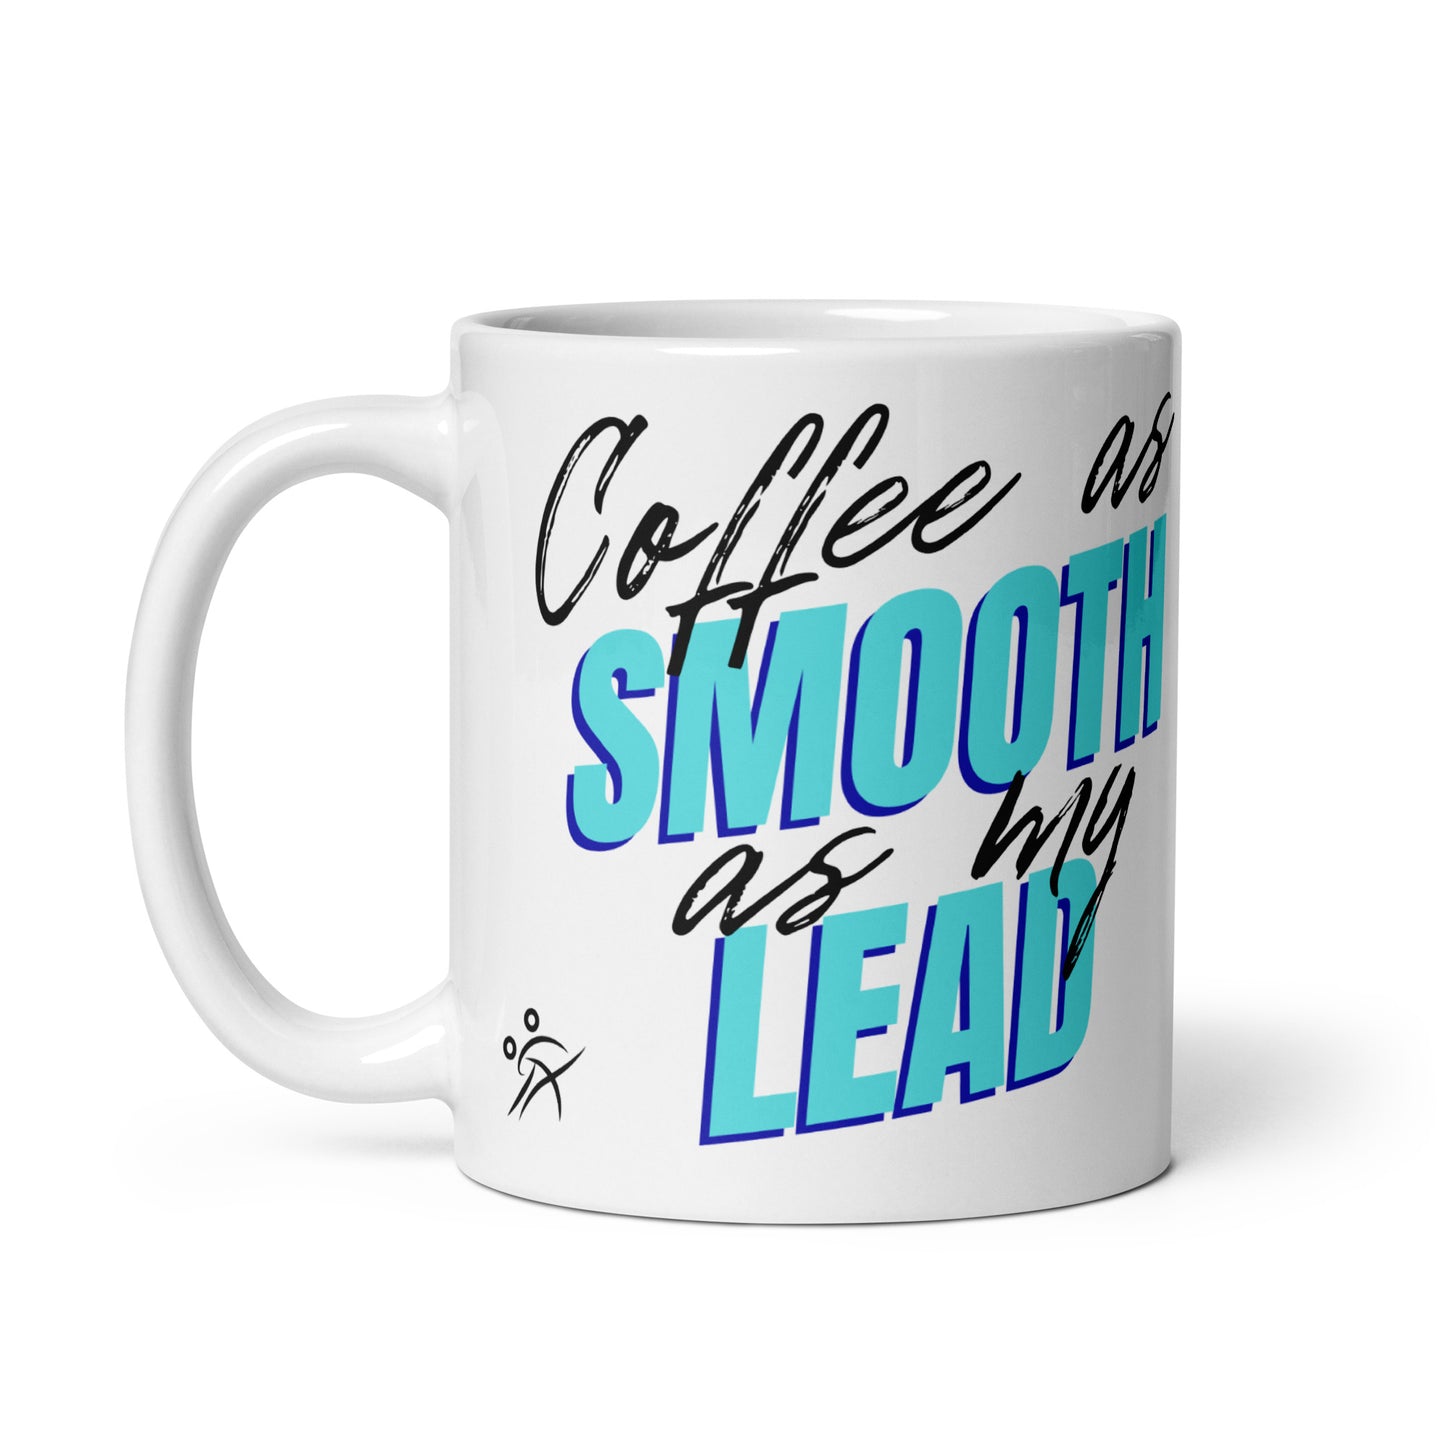 Coffee as Smooth as My Lead